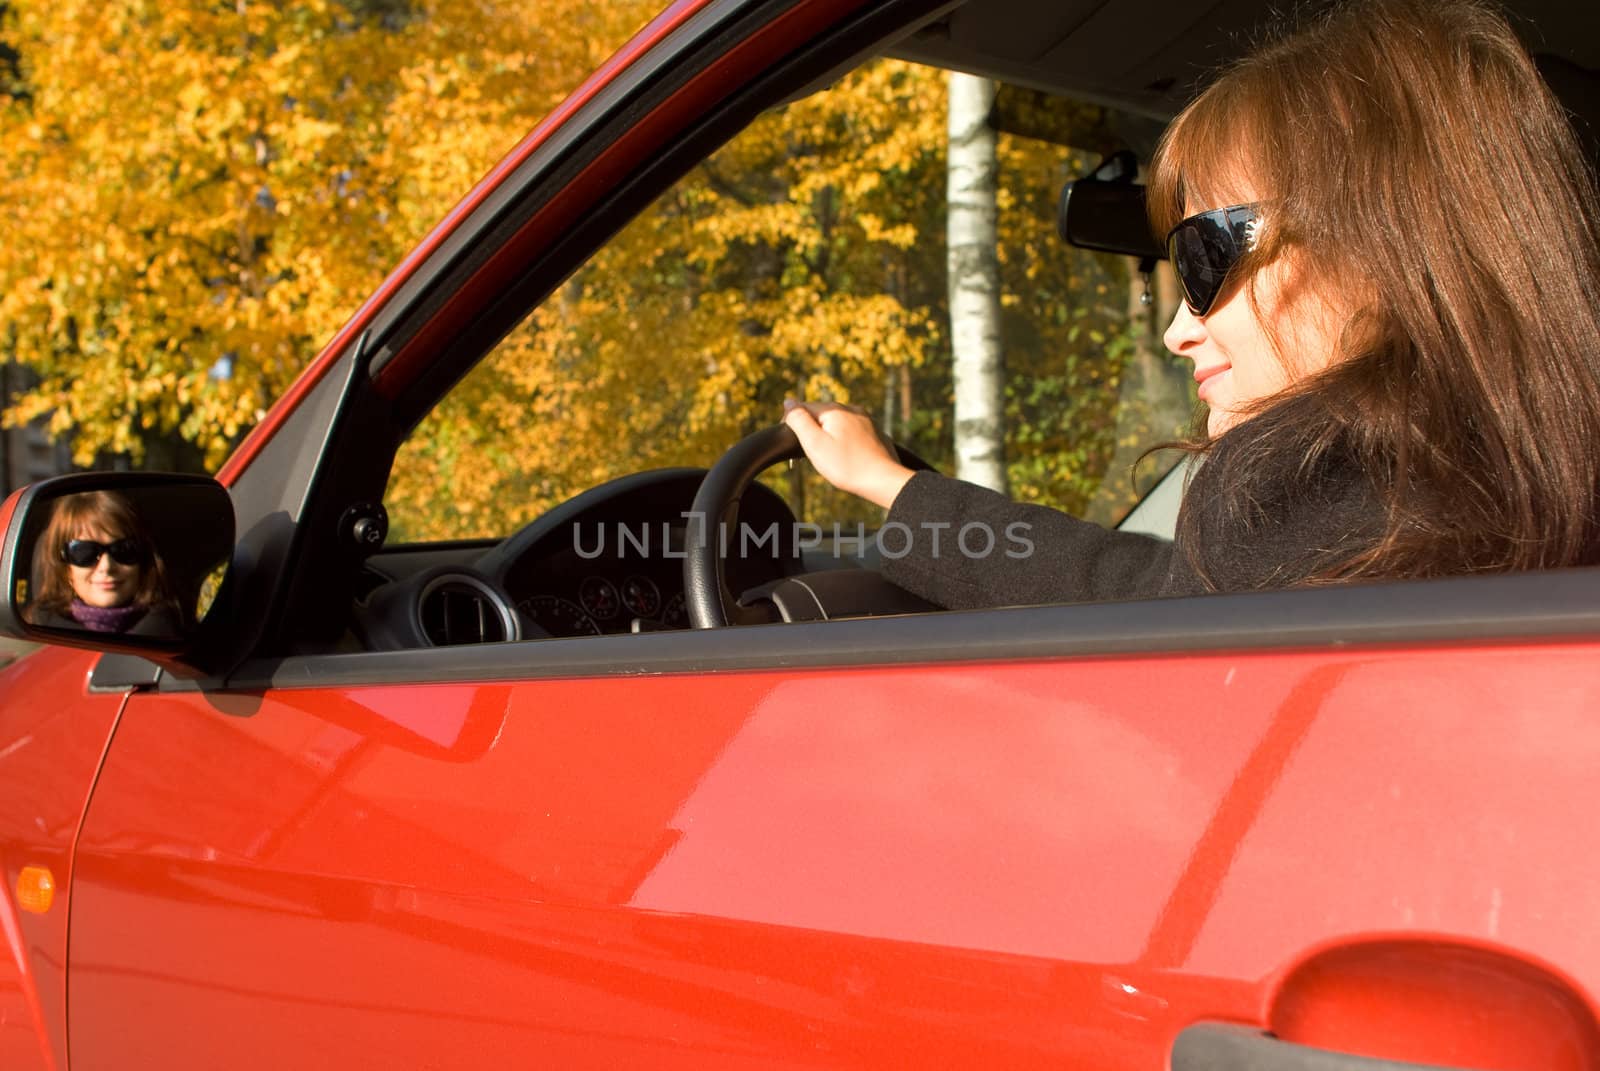 The girl in the red car and her reflection in a mirror